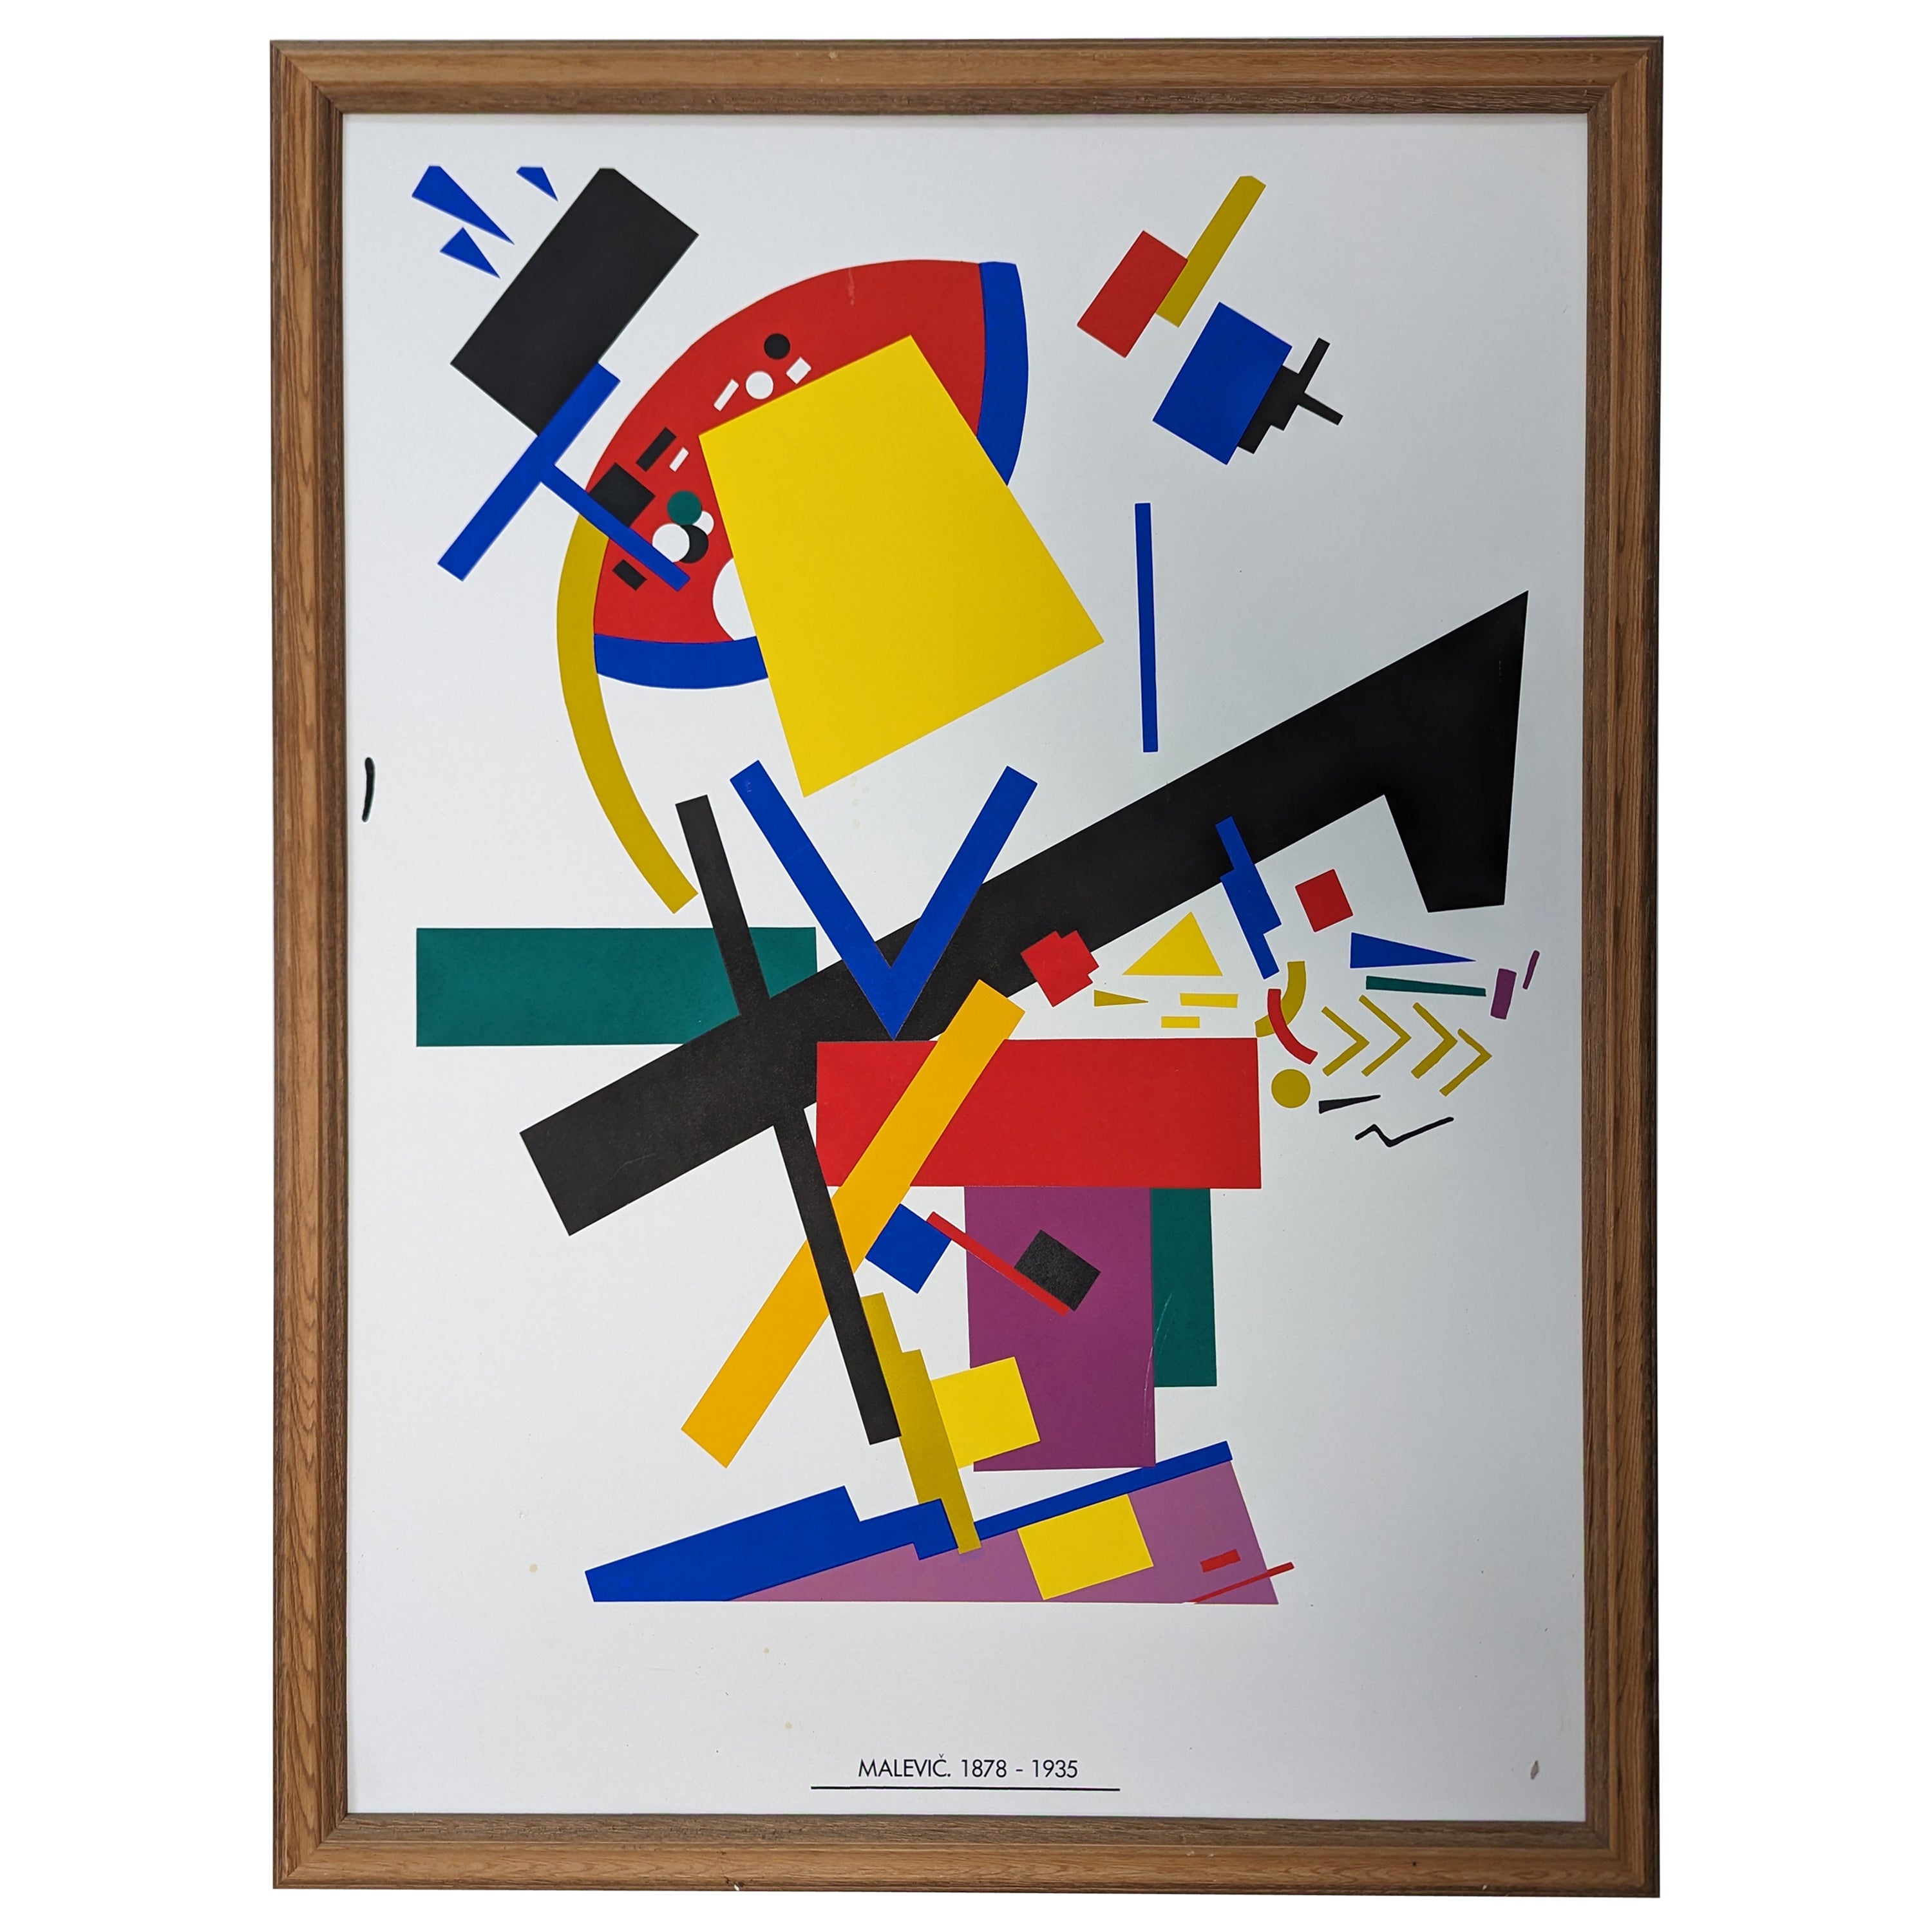 Kazimir Malevich Original Vintage Lithographic Poster For Sale